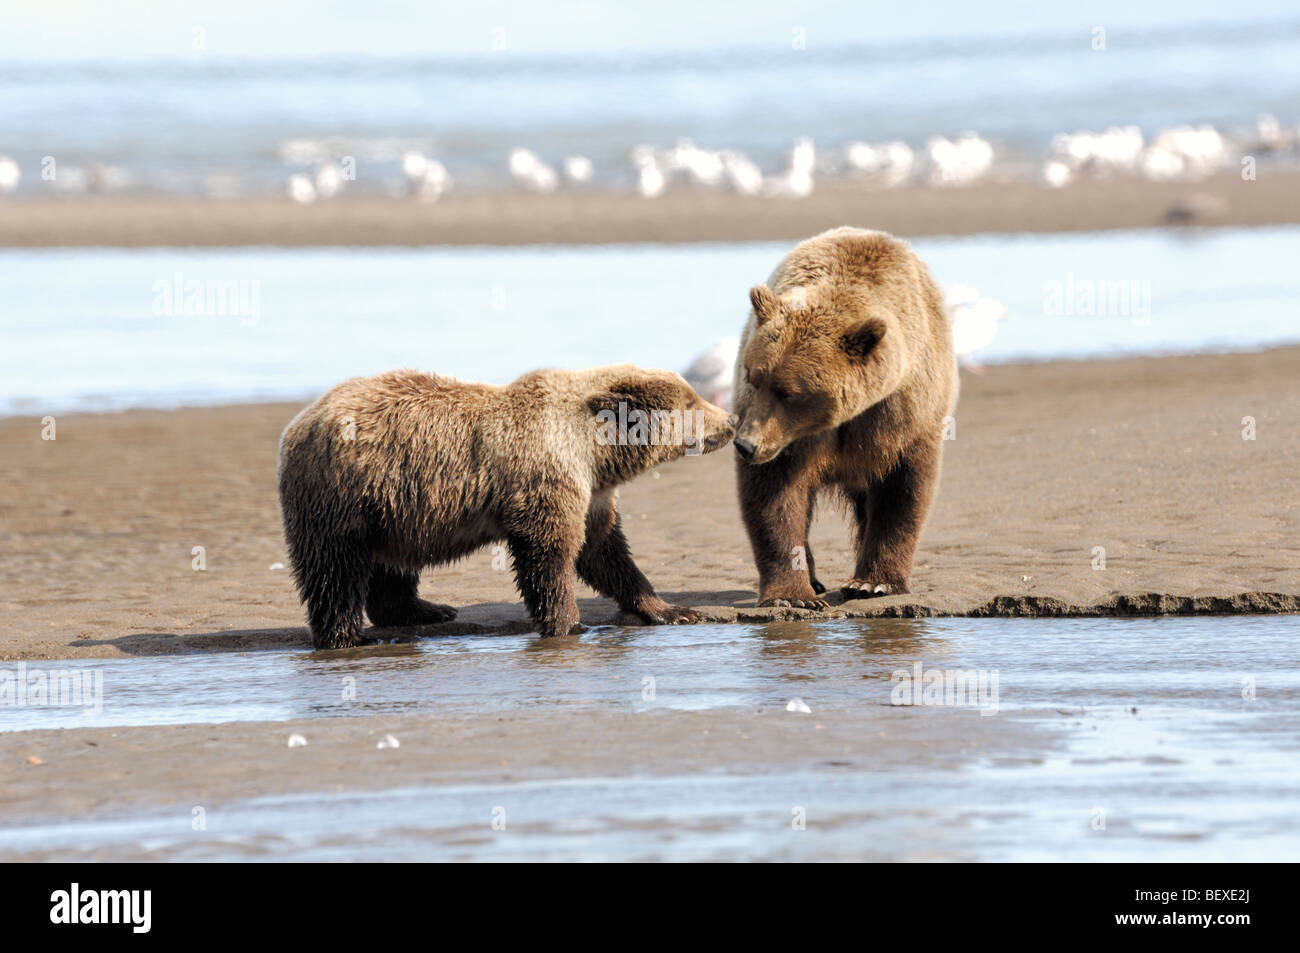 Stock photo of a yearling bear cub approaching his mother at a river inlet from the ocean, Lake Clark National Park, Alaska. Stock Photo